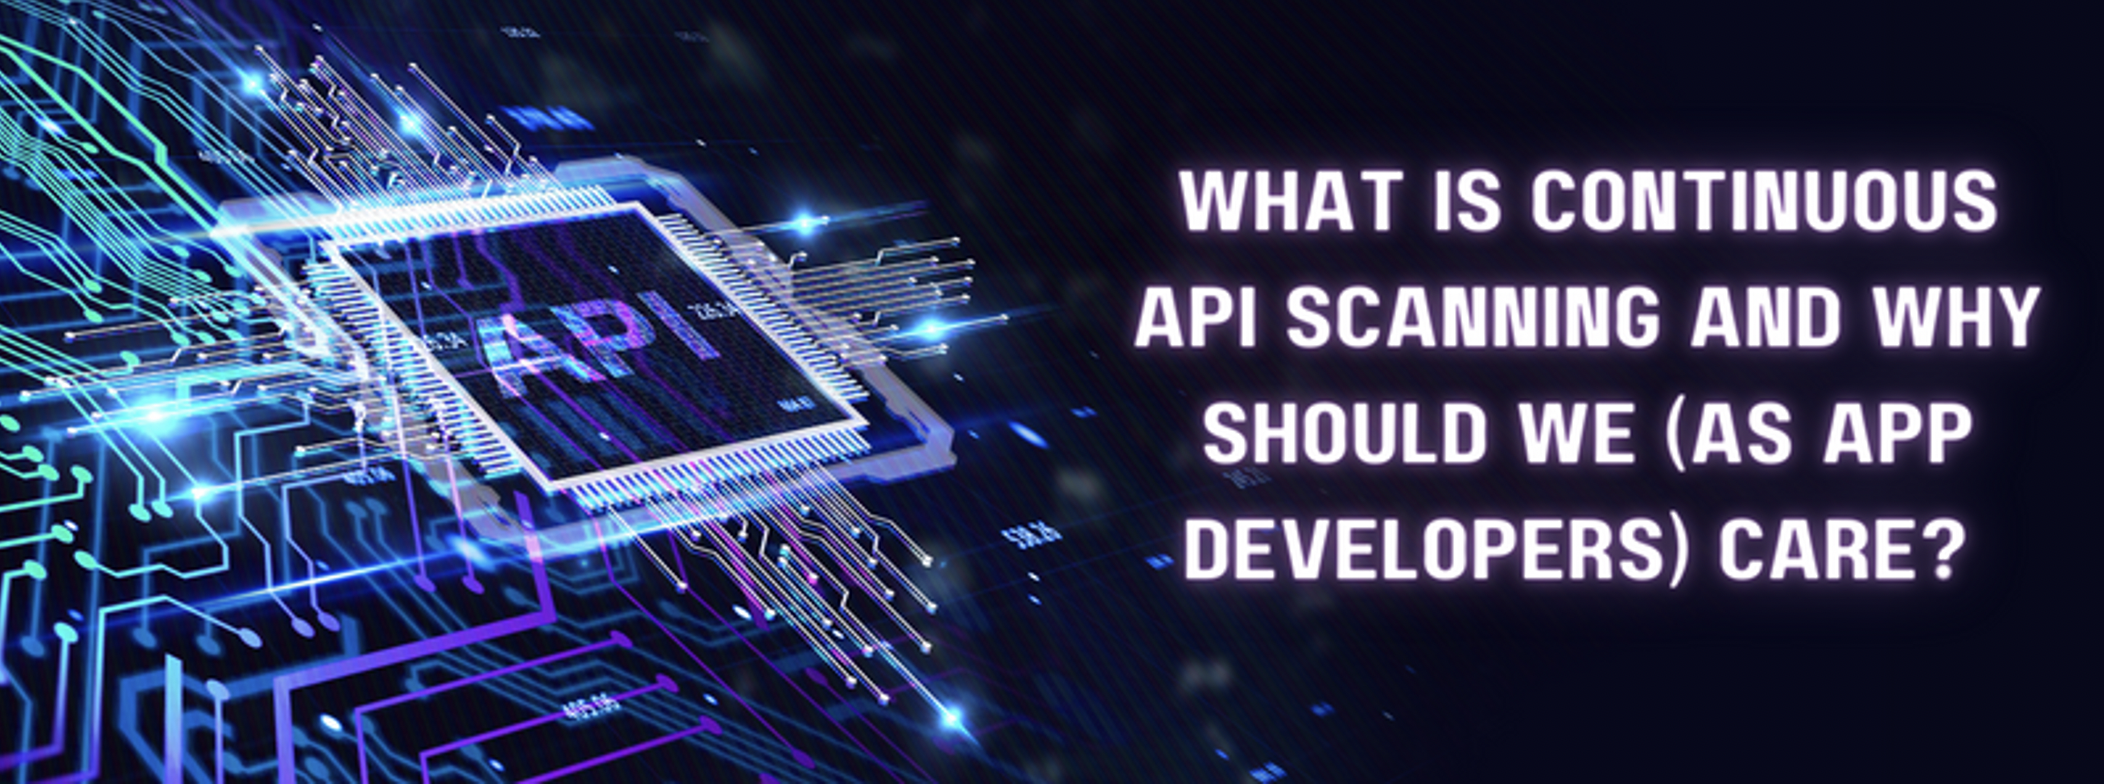 What is Continuous API Scanning and Why Should We (as App Developers) Care?